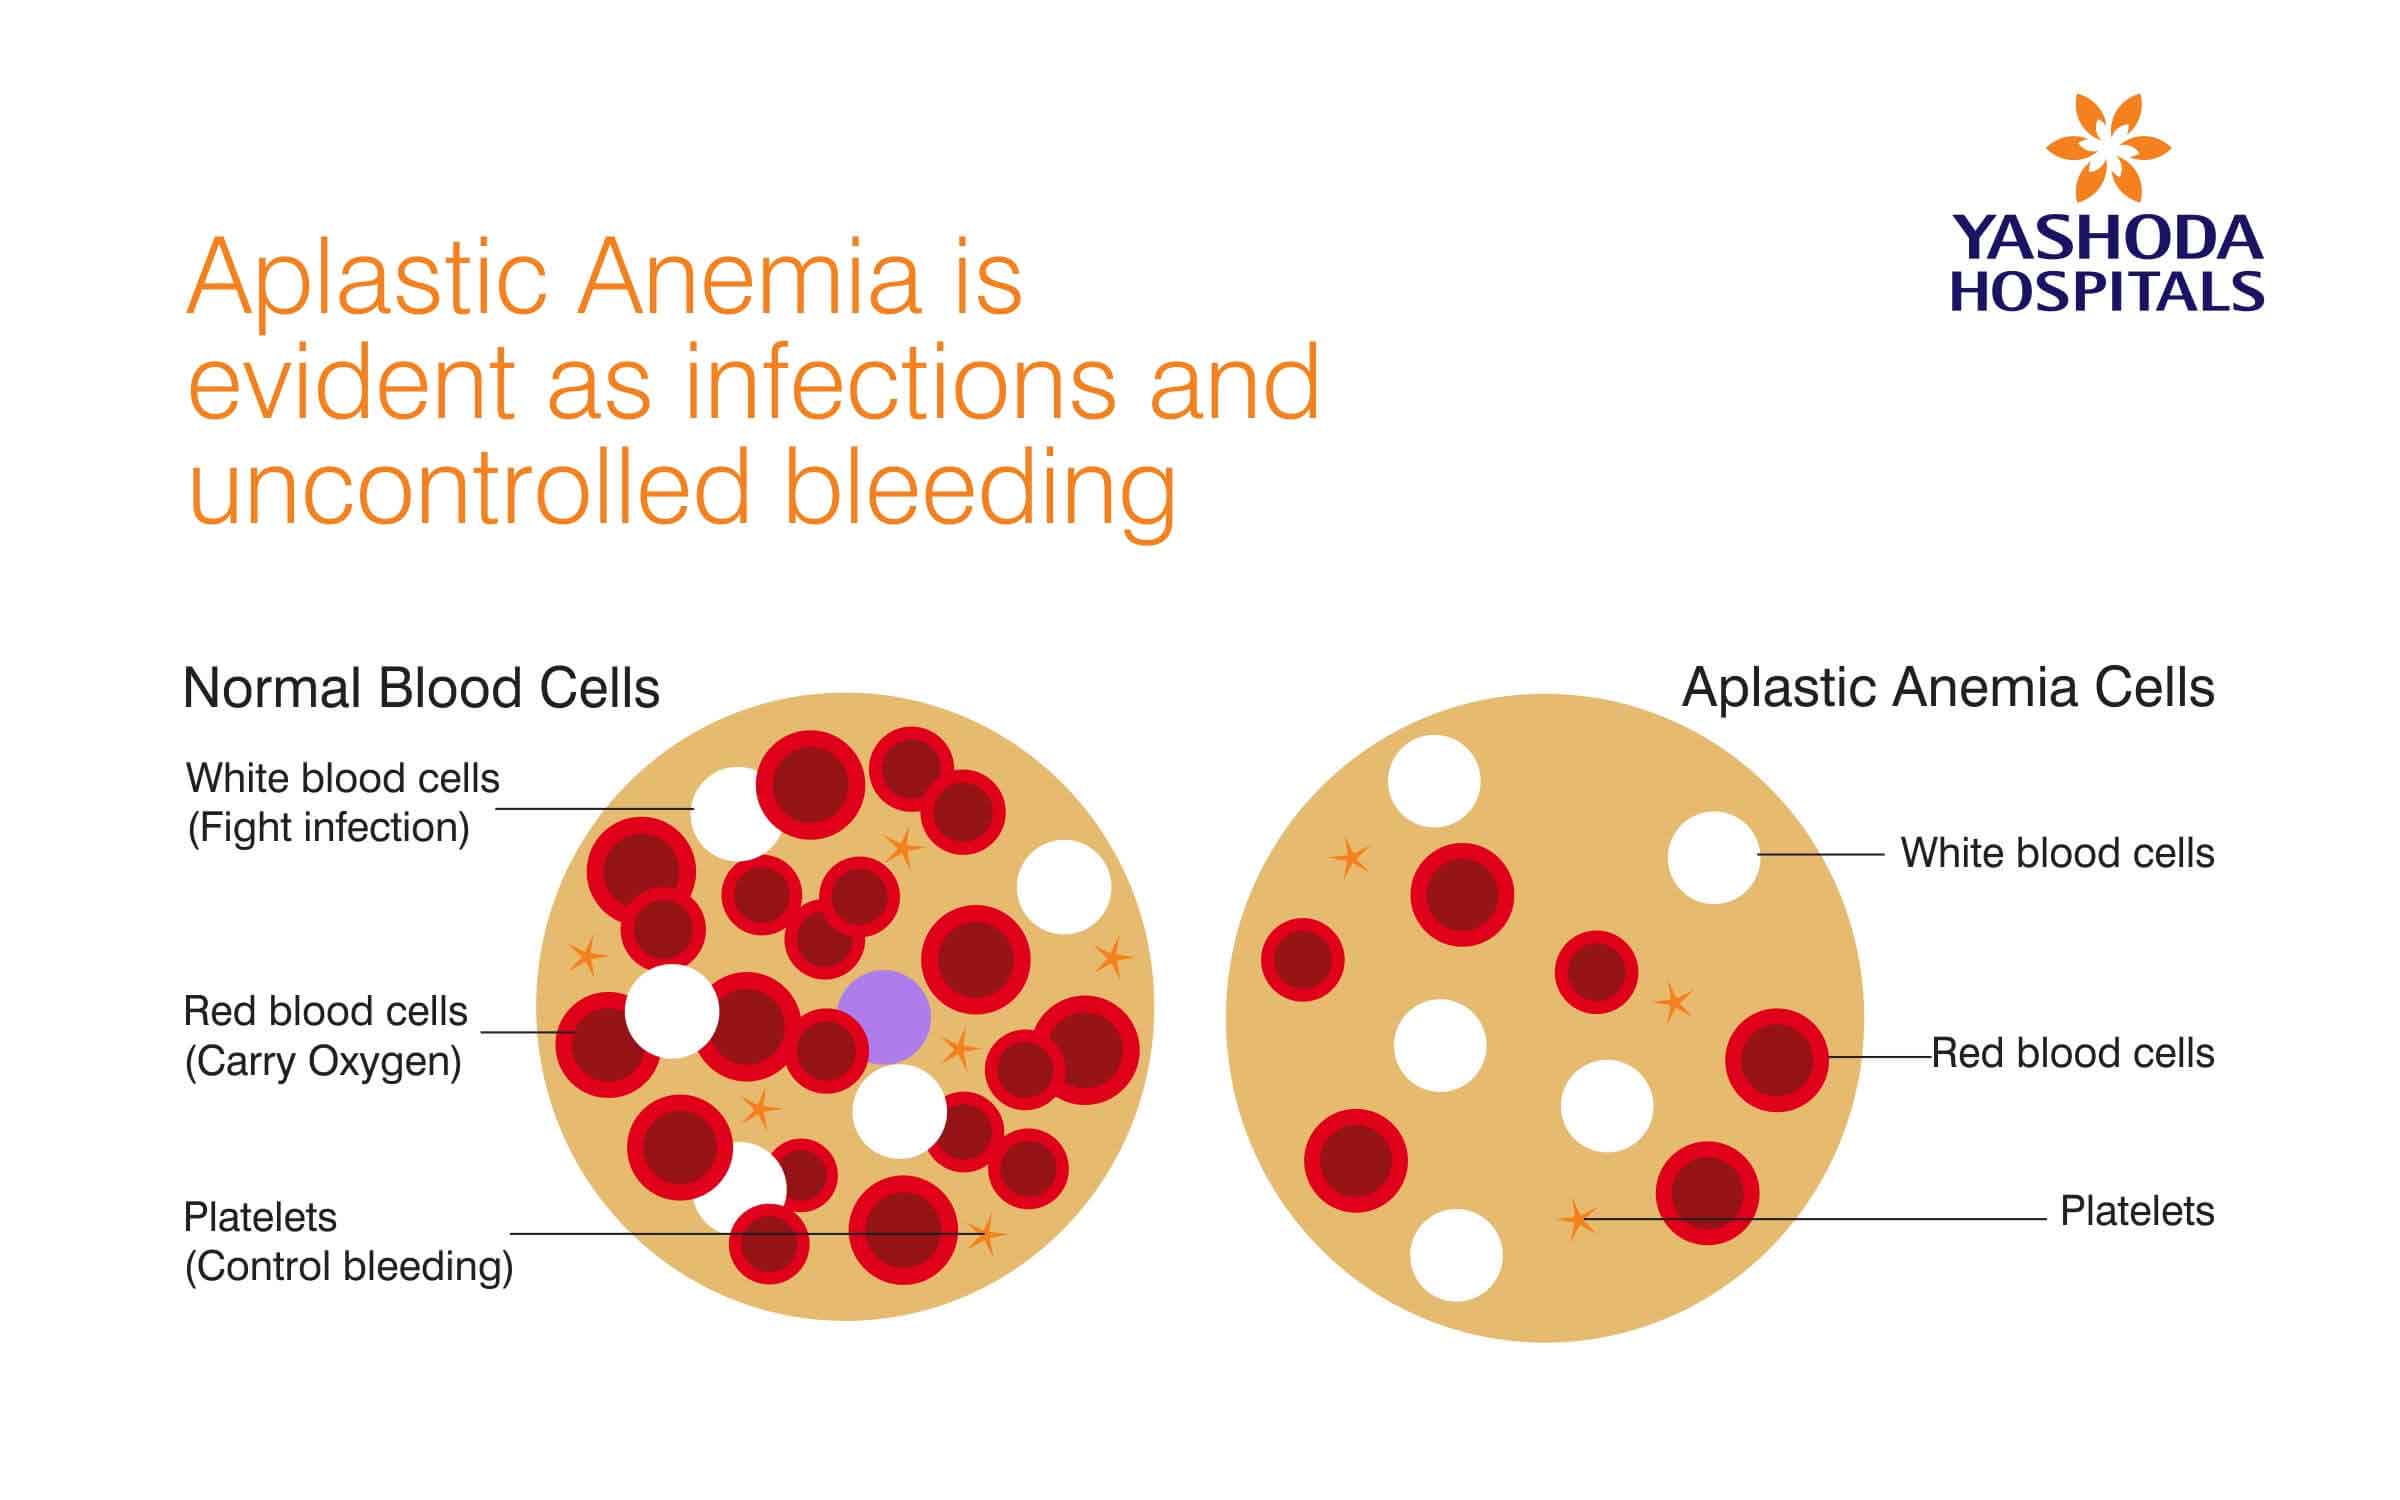 Aplastic Anemia is evident as infections and uncontrolled bleeding.